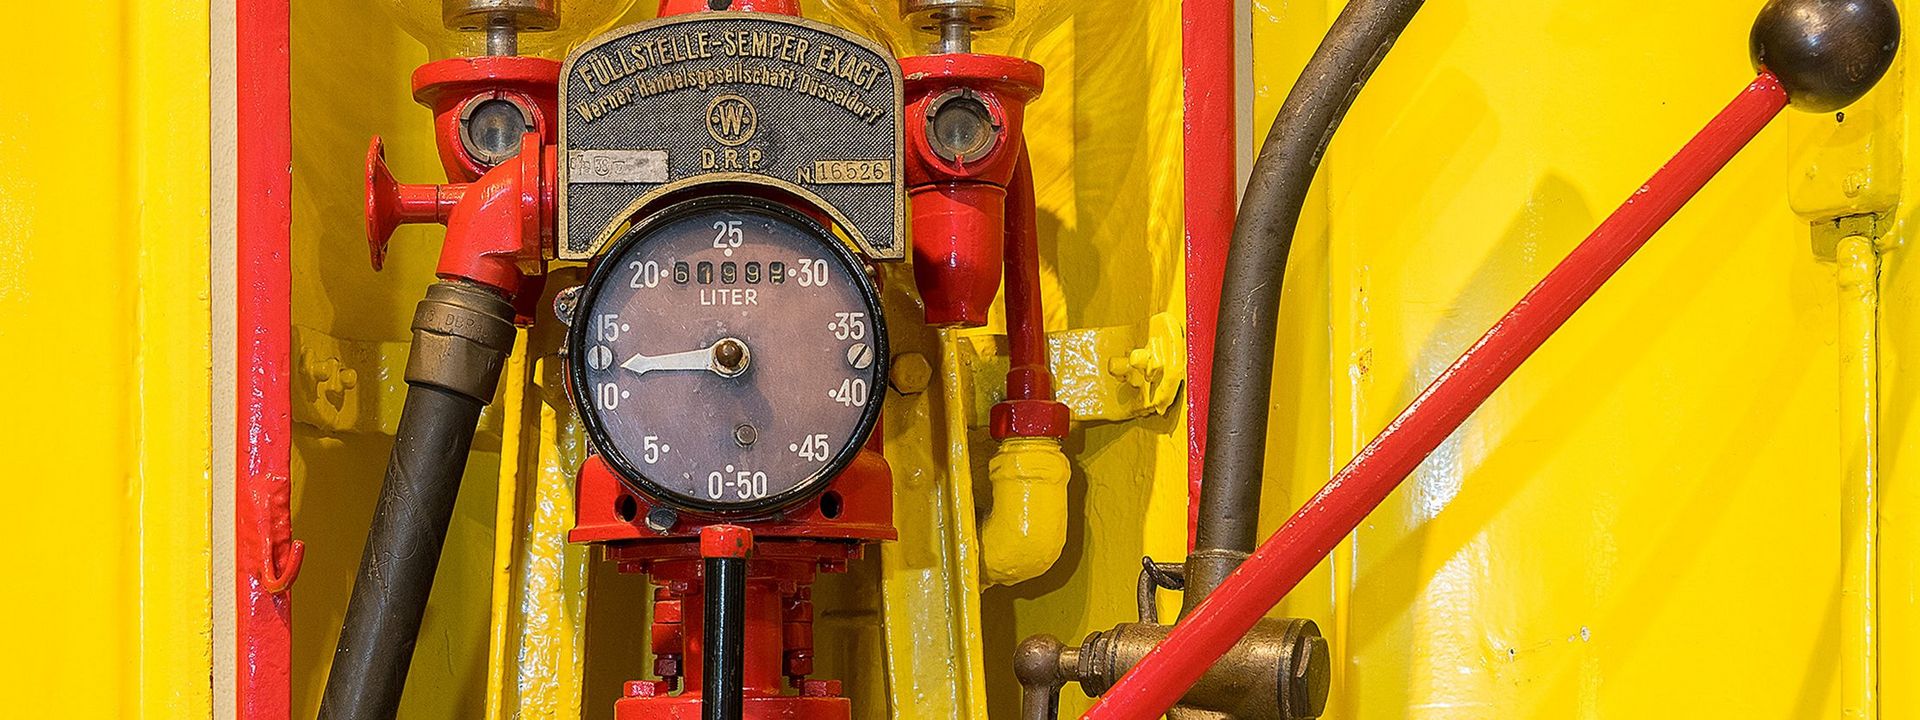 A yellow and red fuel pump. The arrow on the analog gauge in the middle points to between ten and 15. On the metal plate above it, the words “Füllstelle-Sempler Exact” (“Precision Sempler Fuel Pump”) are written.